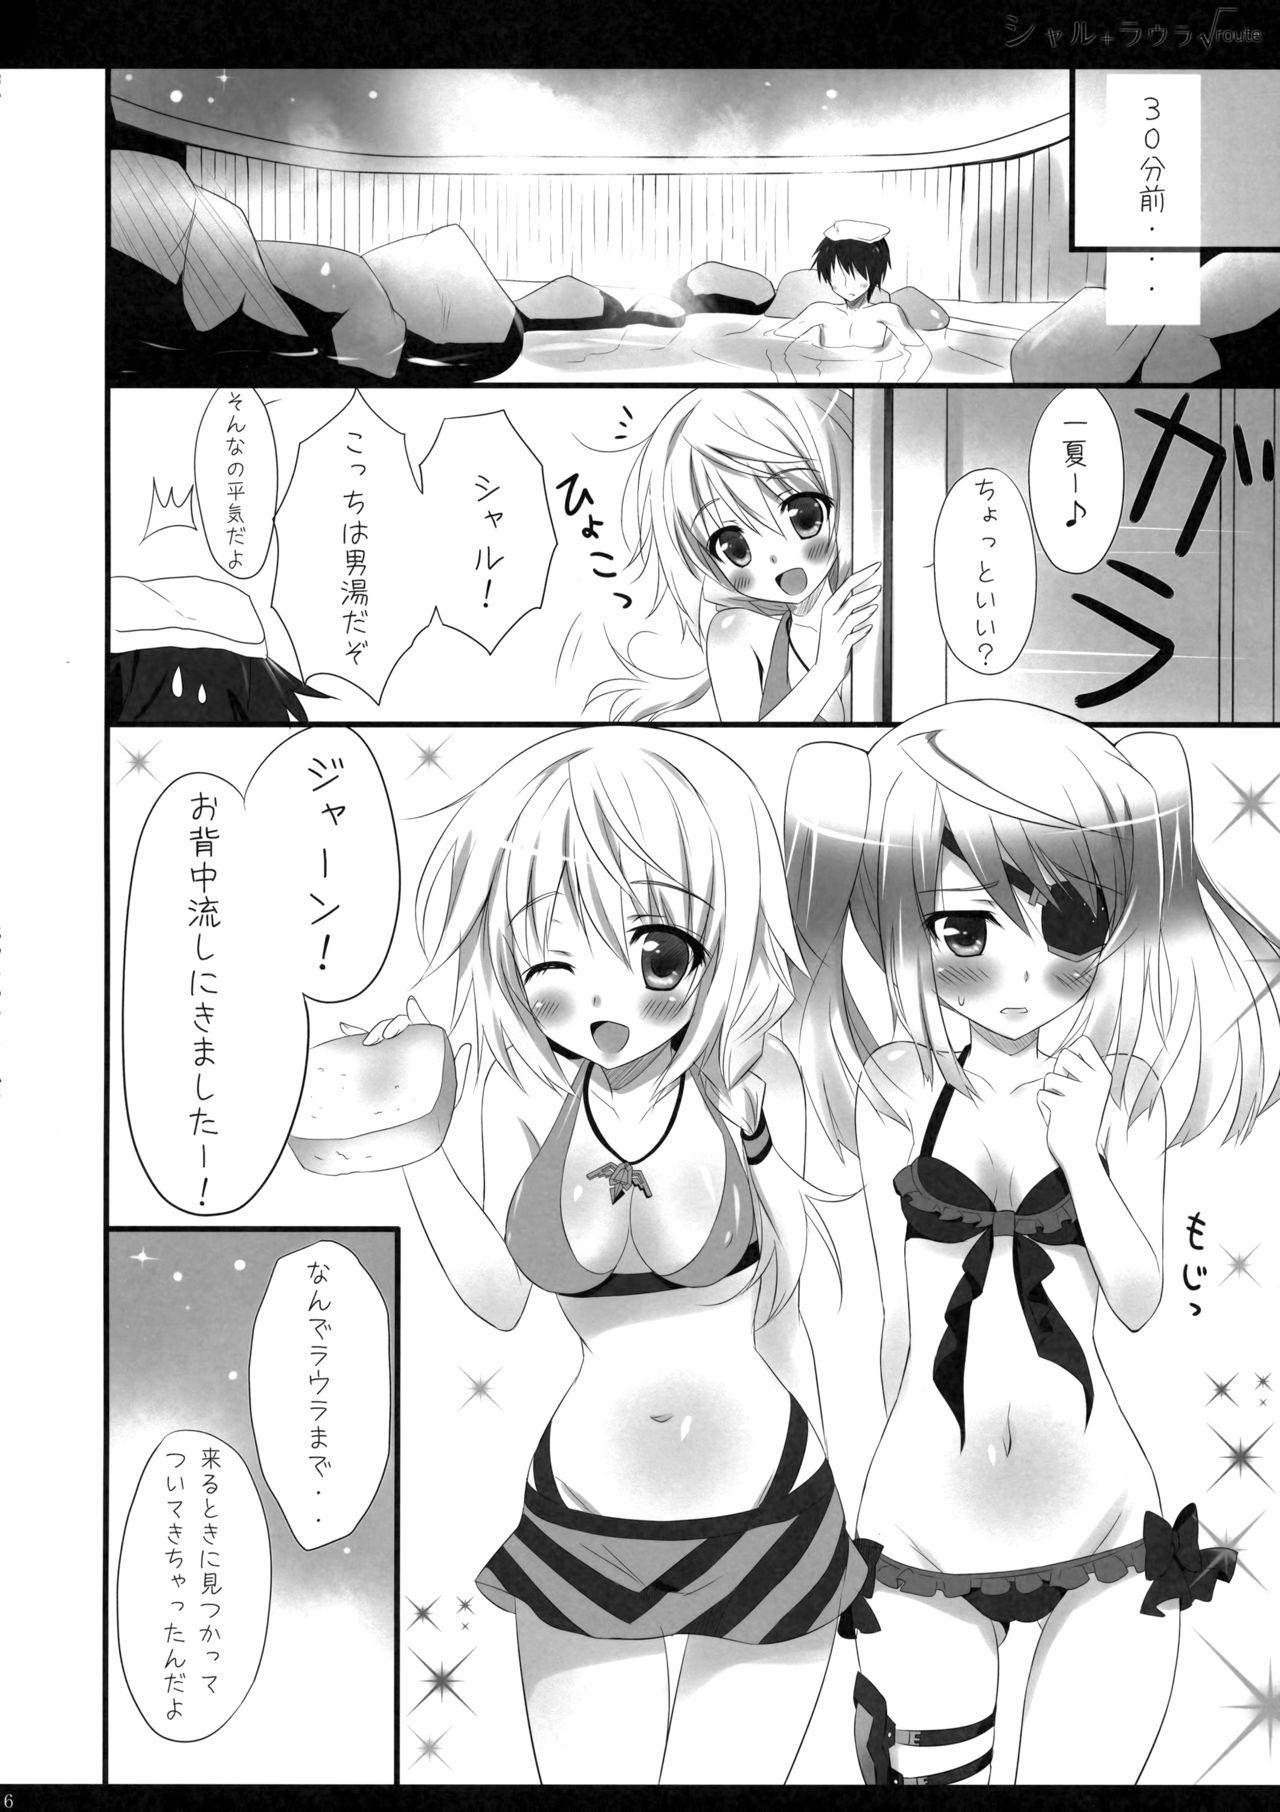 Sexy Sluts Char + Laura √route - Infinite stratos Barely 18 Porn - Page 7